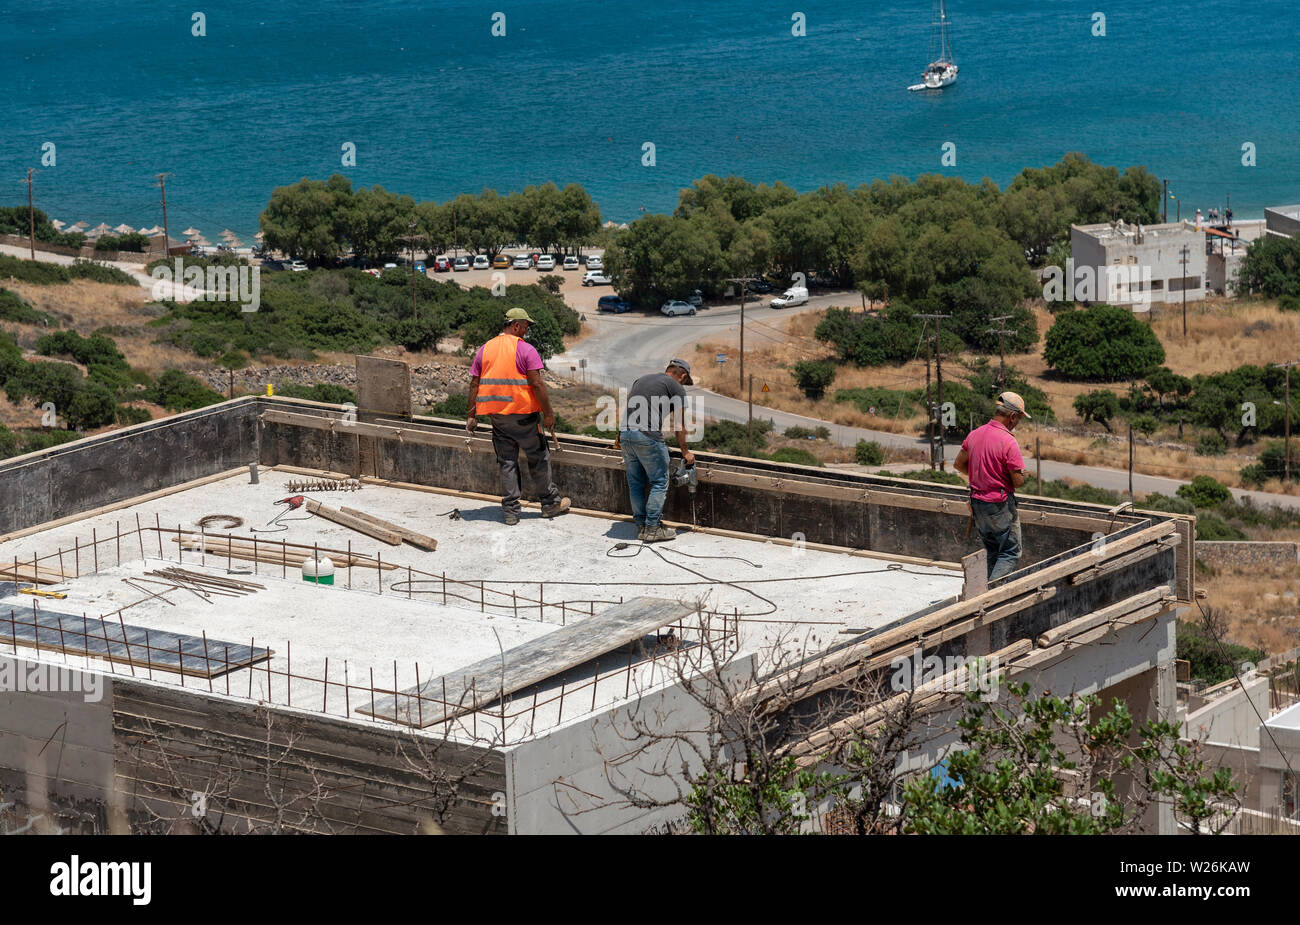 Plaka, Crete, Greece. June 2019. Construction work being carried out behind the coastal village of Plaka. Building new homes and apartments. Stock Photo